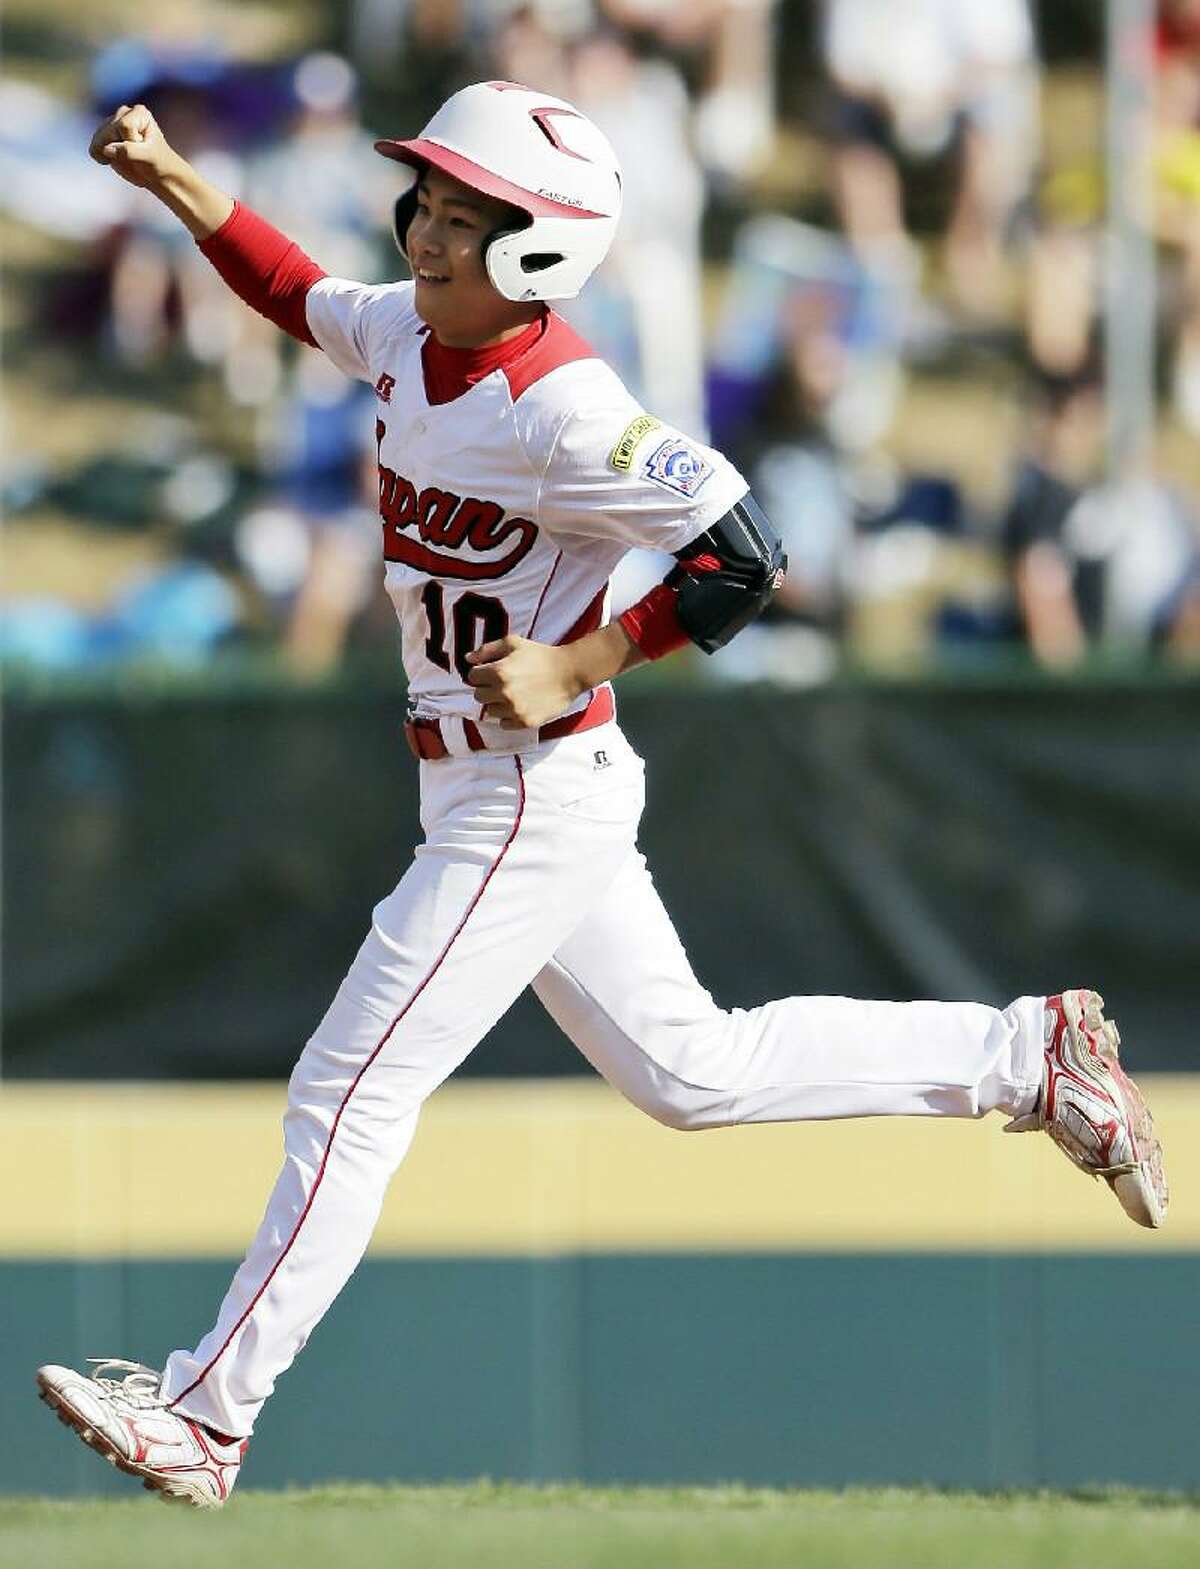 ASSOCIATED PRESS Tokyo, Japan's Noriatsu Osaka celebrates as he rounds the bases after hitting a two-run home run in the fifth inning of the Little League World Series championship baseball game against Goodlettsville, Tenn., Sunday in South Williamsport, Pa. Japan won 12-2 in five innings.